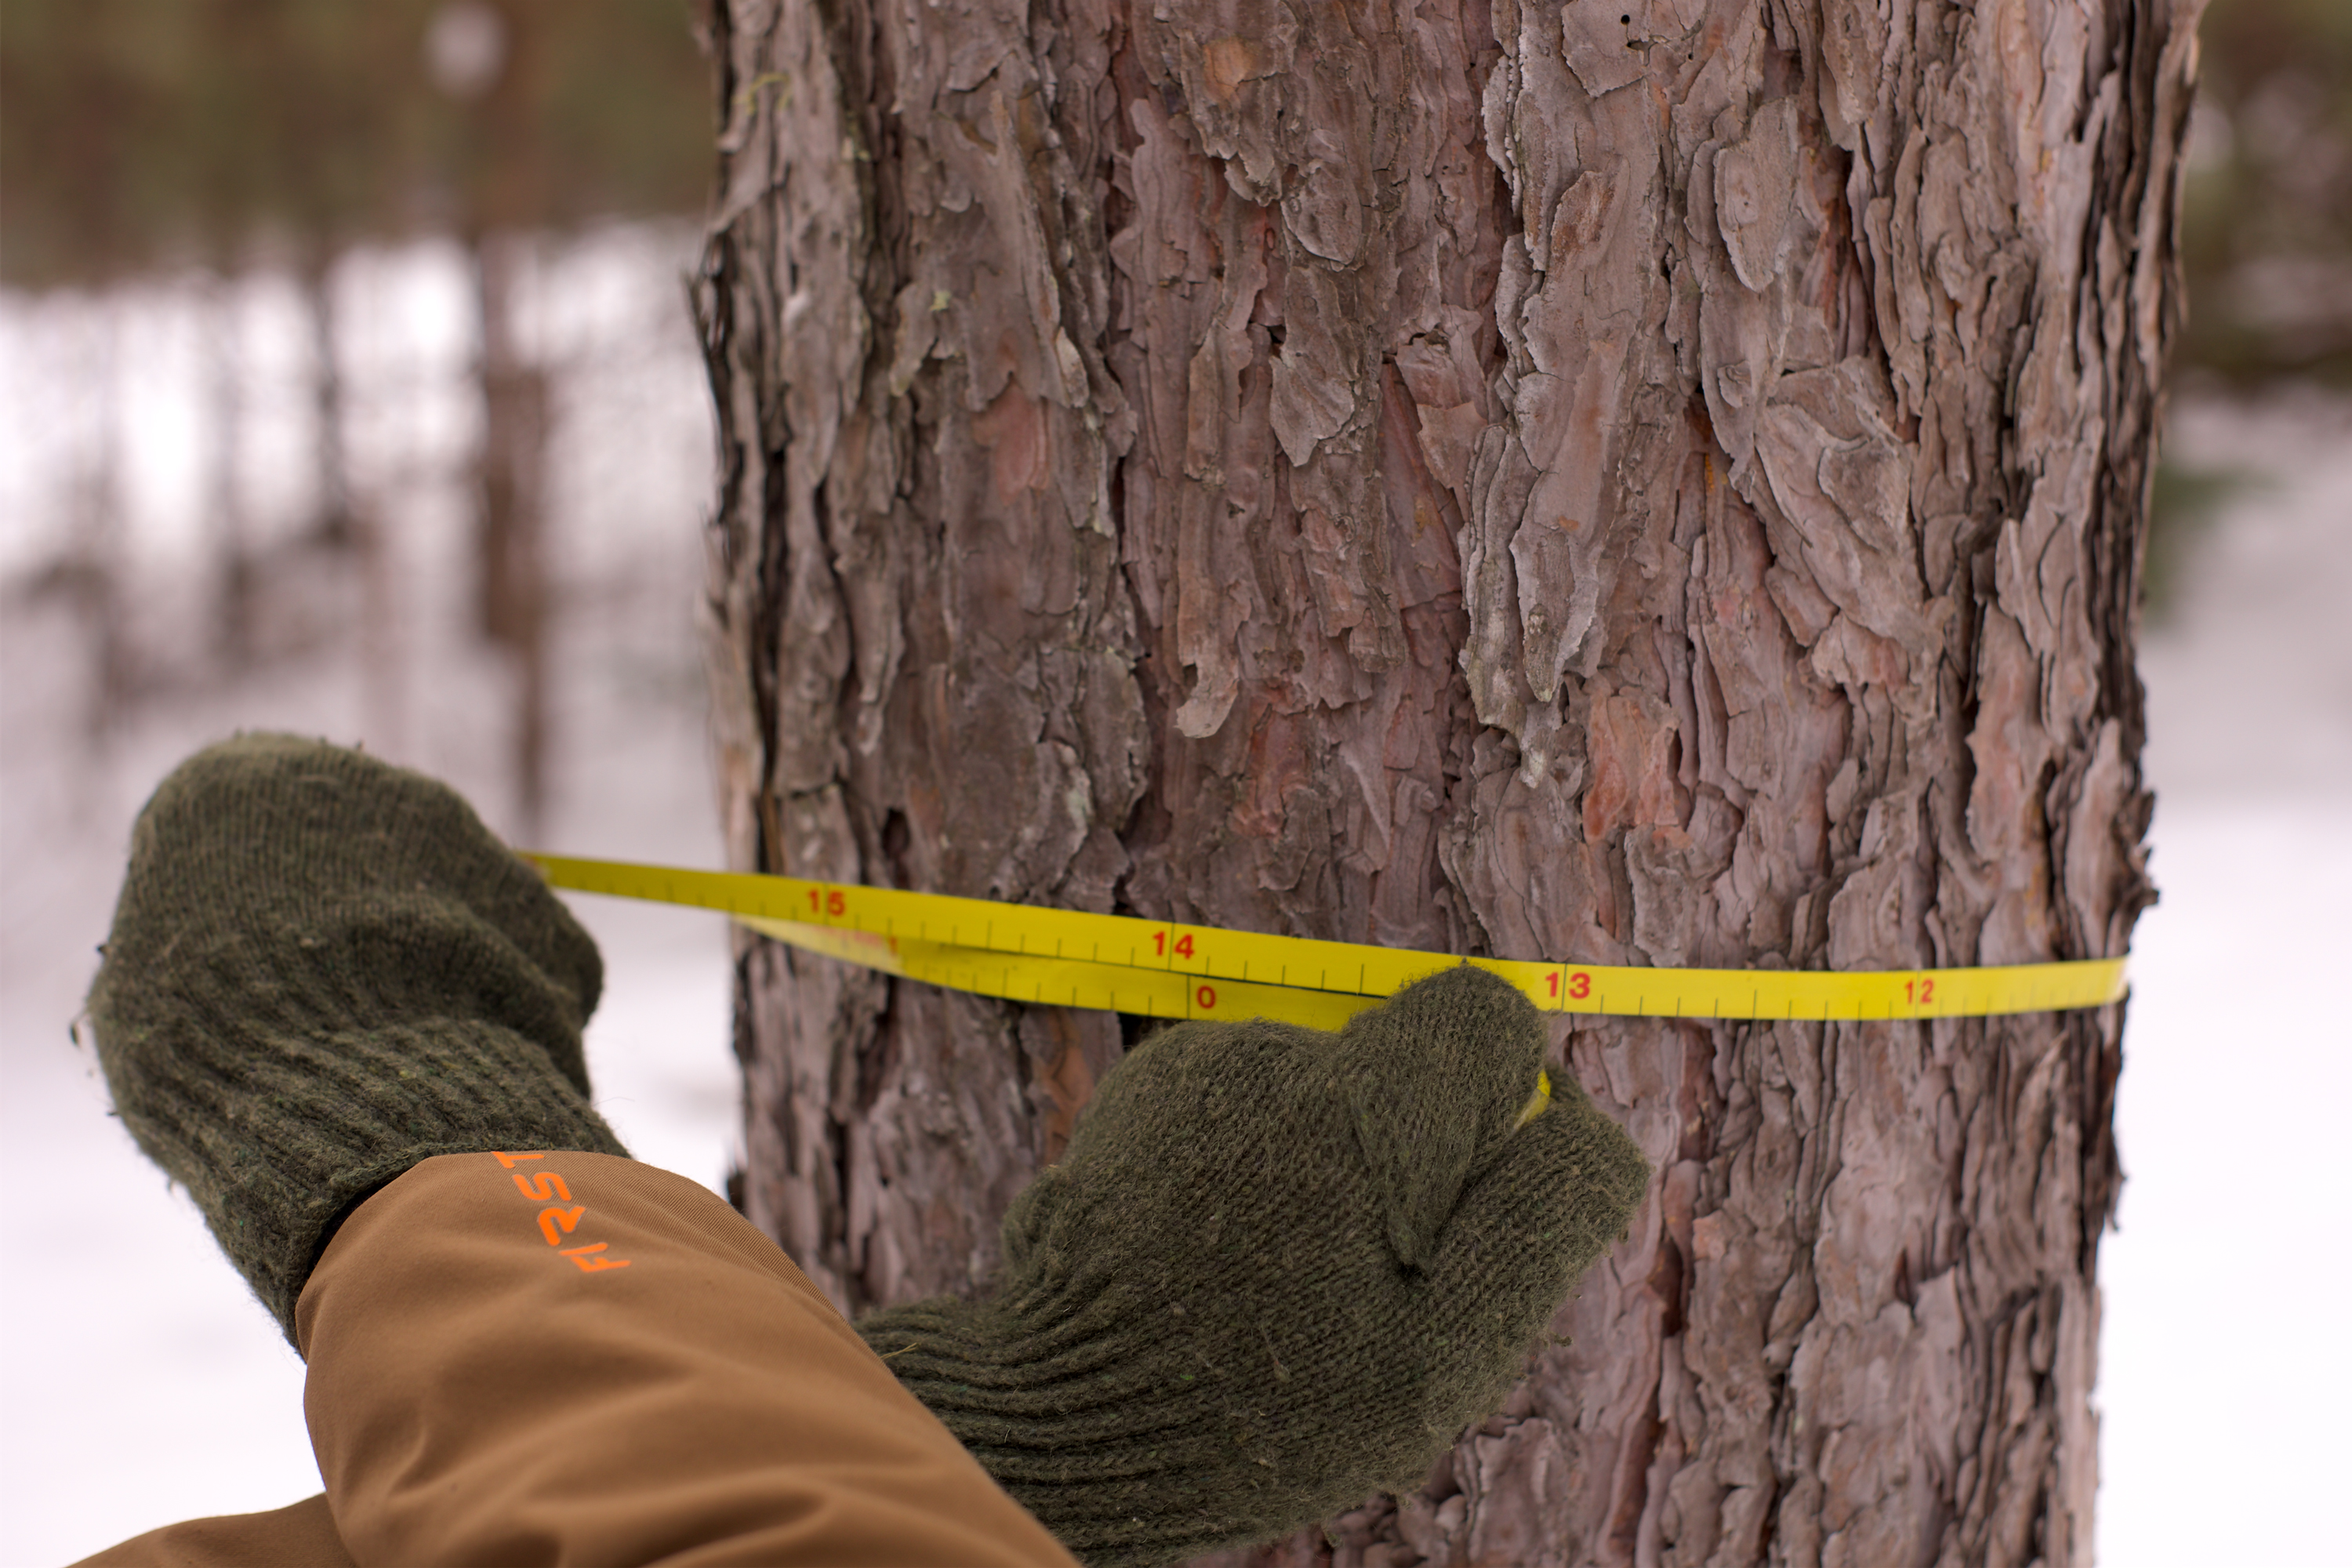 Two gloved hands measuring the circumference of a tree.